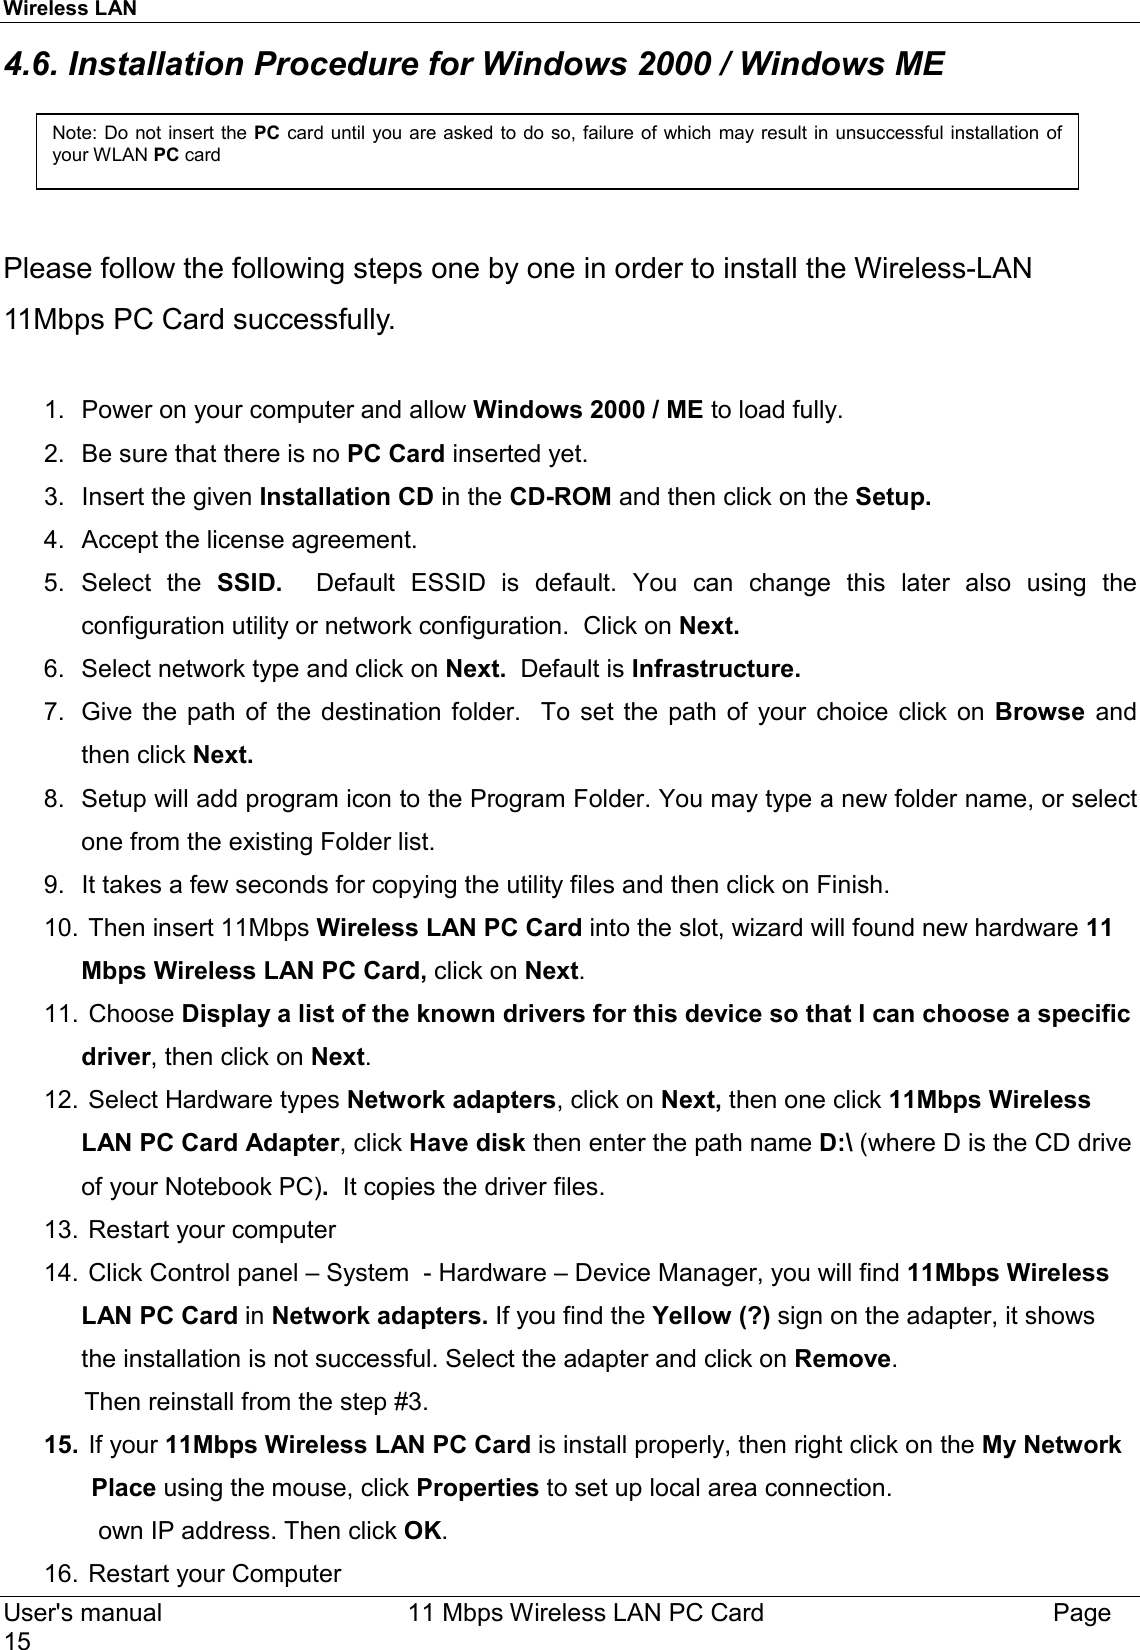 Wireless LAN  User&apos;s manual    11 Mbps Wireless LAN PC Card Page154.6. Installation Procedure for Windows 2000 / Windows MEPlease follow the following steps one by one in order to install the Wireless-LAN11Mbps PC Card successfully.1.  Power on your computer and allow Windows 2000 / ME to load fully.2.  Be sure that there is no PC Card inserted yet.3.  Insert the given Installation CD in the CD-ROM and then click on the Setup.4.  Accept the license agreement.5. Select the SSID.  Default ESSID is default. You can change this later also using theconfiguration utility or network configuration.  Click on Next.6.  Select network type and click on Next.  Default is Infrastructure.7.  Give the path of the destination folder.  To set the path of your choice click on Browse  andthen click Next.8.  Setup will add program icon to the Program Folder. You may type a new folder name, or selectone from the existing Folder list.9.  It takes a few seconds for copying the utility files and then click on Finish.10.  Then insert 11Mbps Wireless LAN PC Card into the slot, wizard will found new hardware 11Mbps Wireless LAN PC Card, click on Next.11.   Choose  Display a list of the known drivers for this device so that I can choose a specificdriver, then click on Next.12.  Select Hardware types Network adapters, click on Next, then one click 11Mbps WirelessLAN PC Card Adapter, click Have disk then enter the path name D:\ (where D is the CD driveof your Notebook PC).  It copies the driver files.13.  Restart your computer14.  Click Control panel – System  - Hardware – Device Manager, you will find 11Mbps WirelessLAN PC Card in Network adapters. If you find the Yellow (?) sign on the adapter, it showsthe installation is not successful. Select the adapter and click on Remove.            Then reinstall from the step #3.15.  If your 11Mbps Wireless LAN PC Card is install properly, then right click on the My Network             Place using the mouse, click Properties to set up local area connection.              own IP address. Then click OK.16.  Restart your ComputerNote: Do not insert the PC card until you are asked to do so, failure of which may result in unsuccessful installation ofyour WLAN PC card